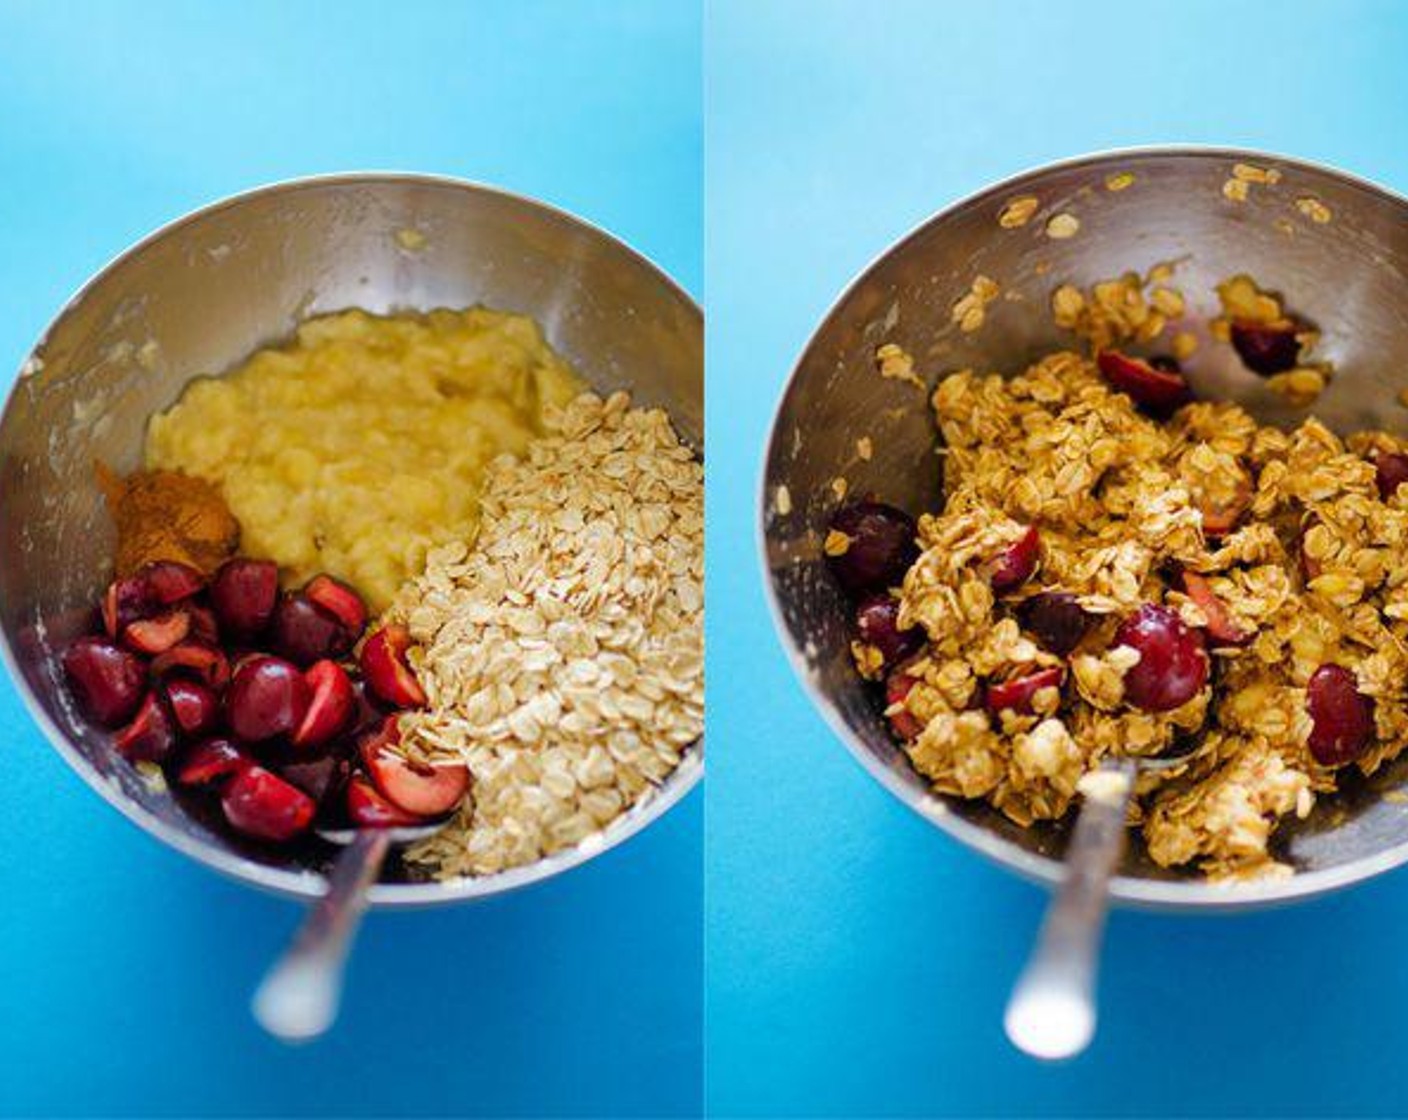 step 1 In a large bowl, mash Bananas (2) with a fork. Stir in Cherry (1/2 cup), Old Fashioned Rolled Oats (1 1/2 cups) and Ground Cinnamon (1 tsp).